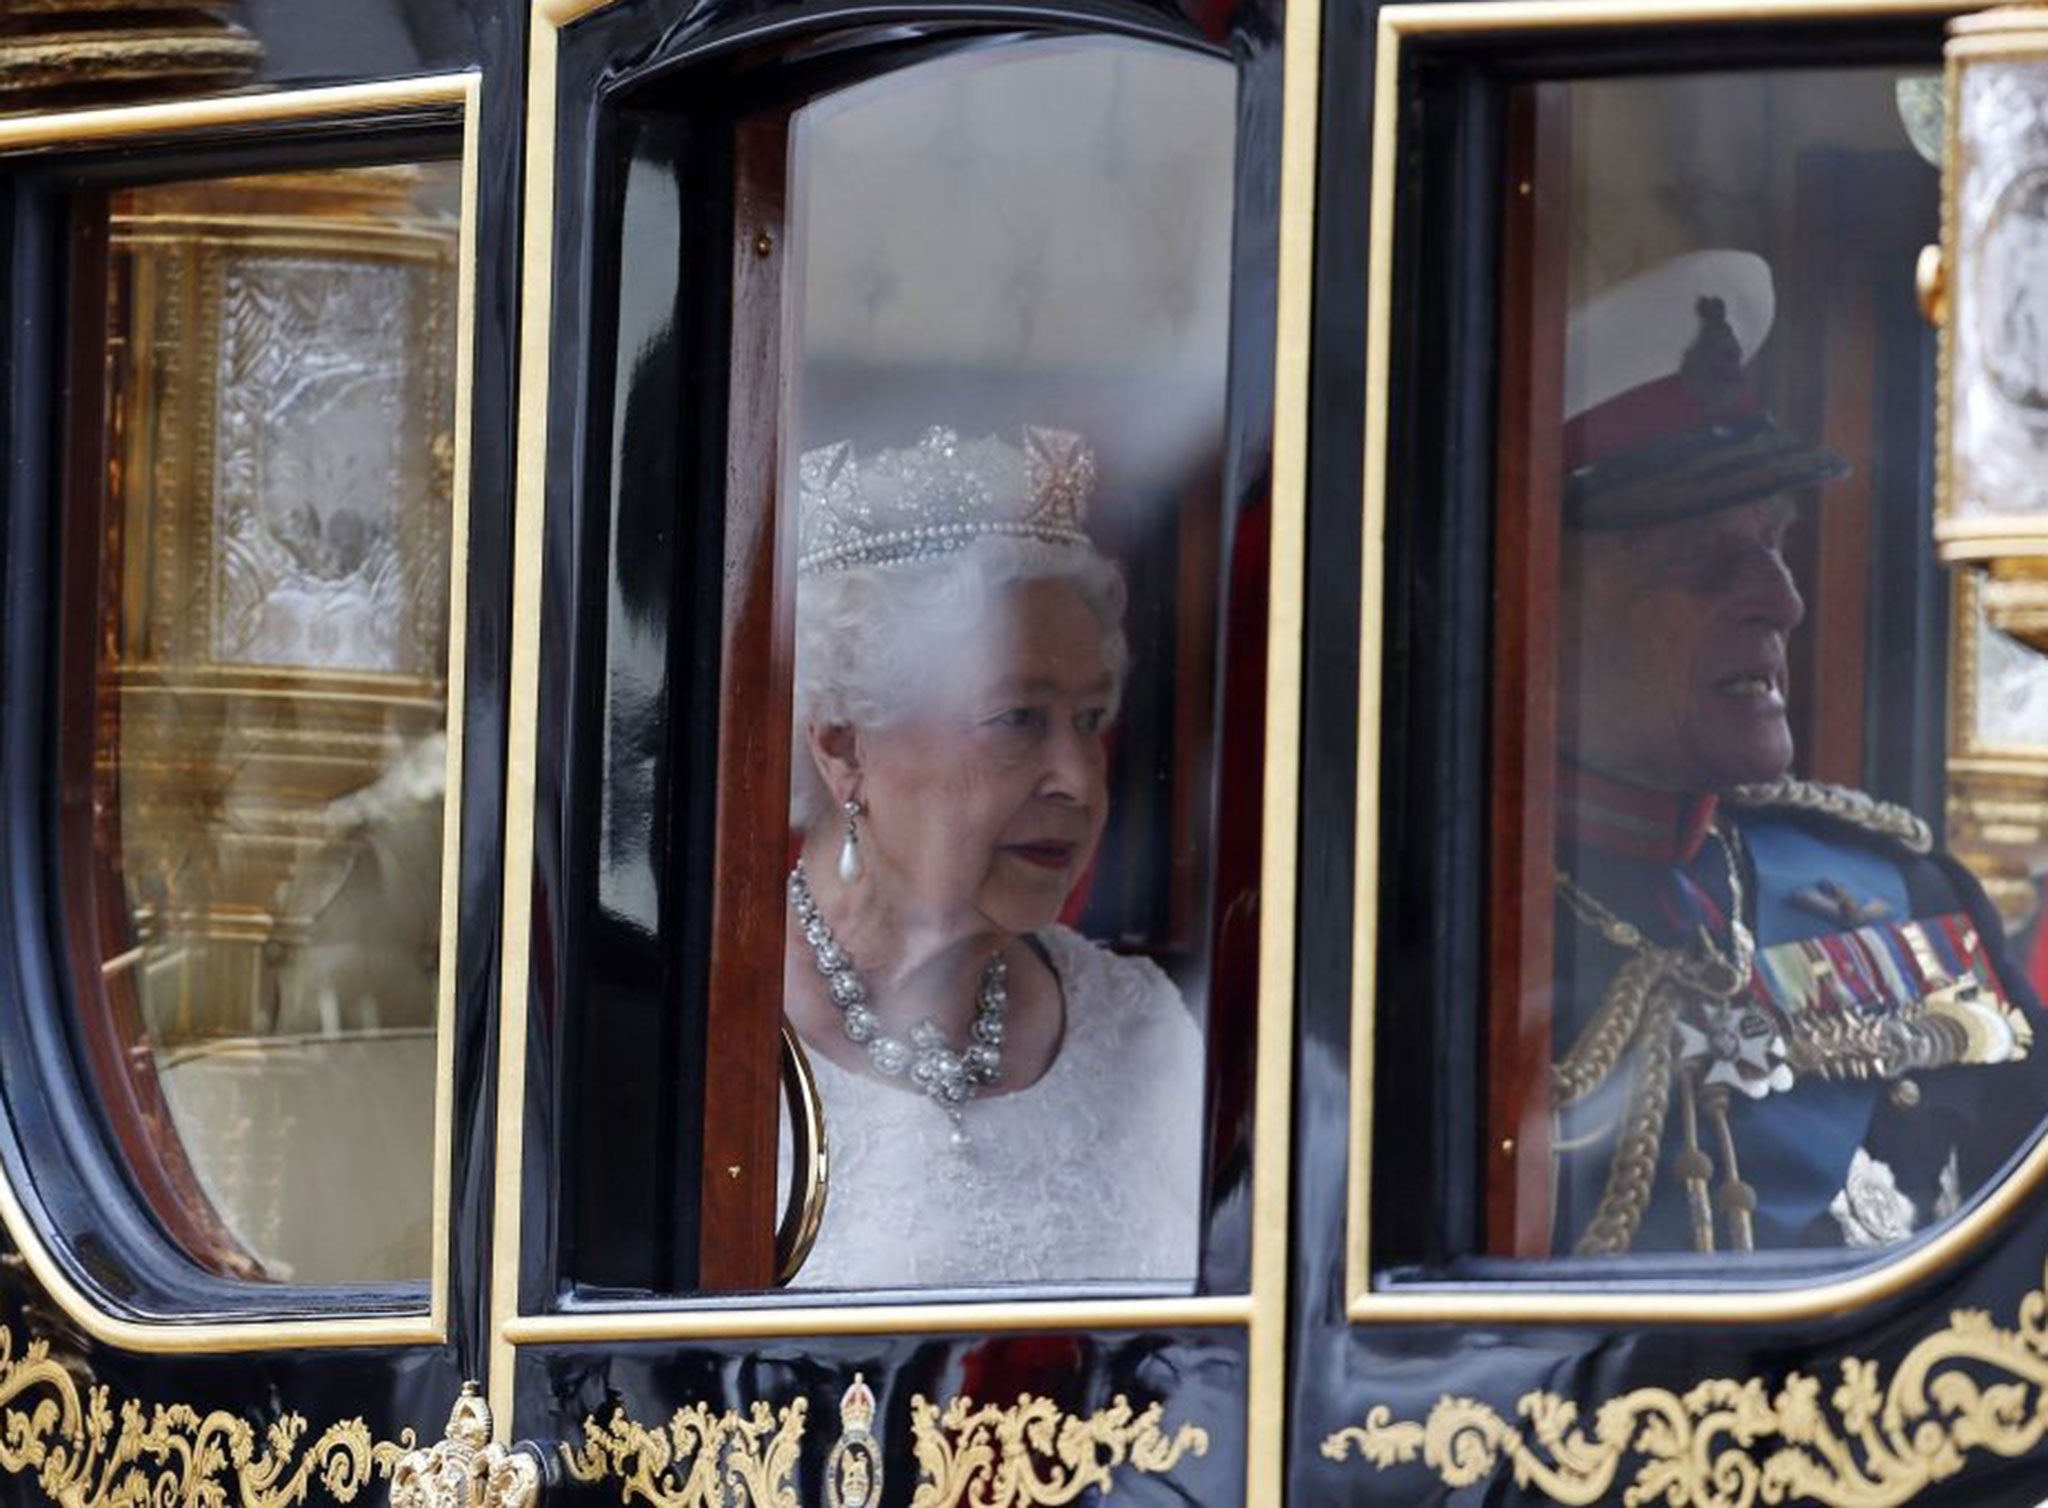 Eleven new Bills were announced by the Queen when she read the Speech in the House of Lords